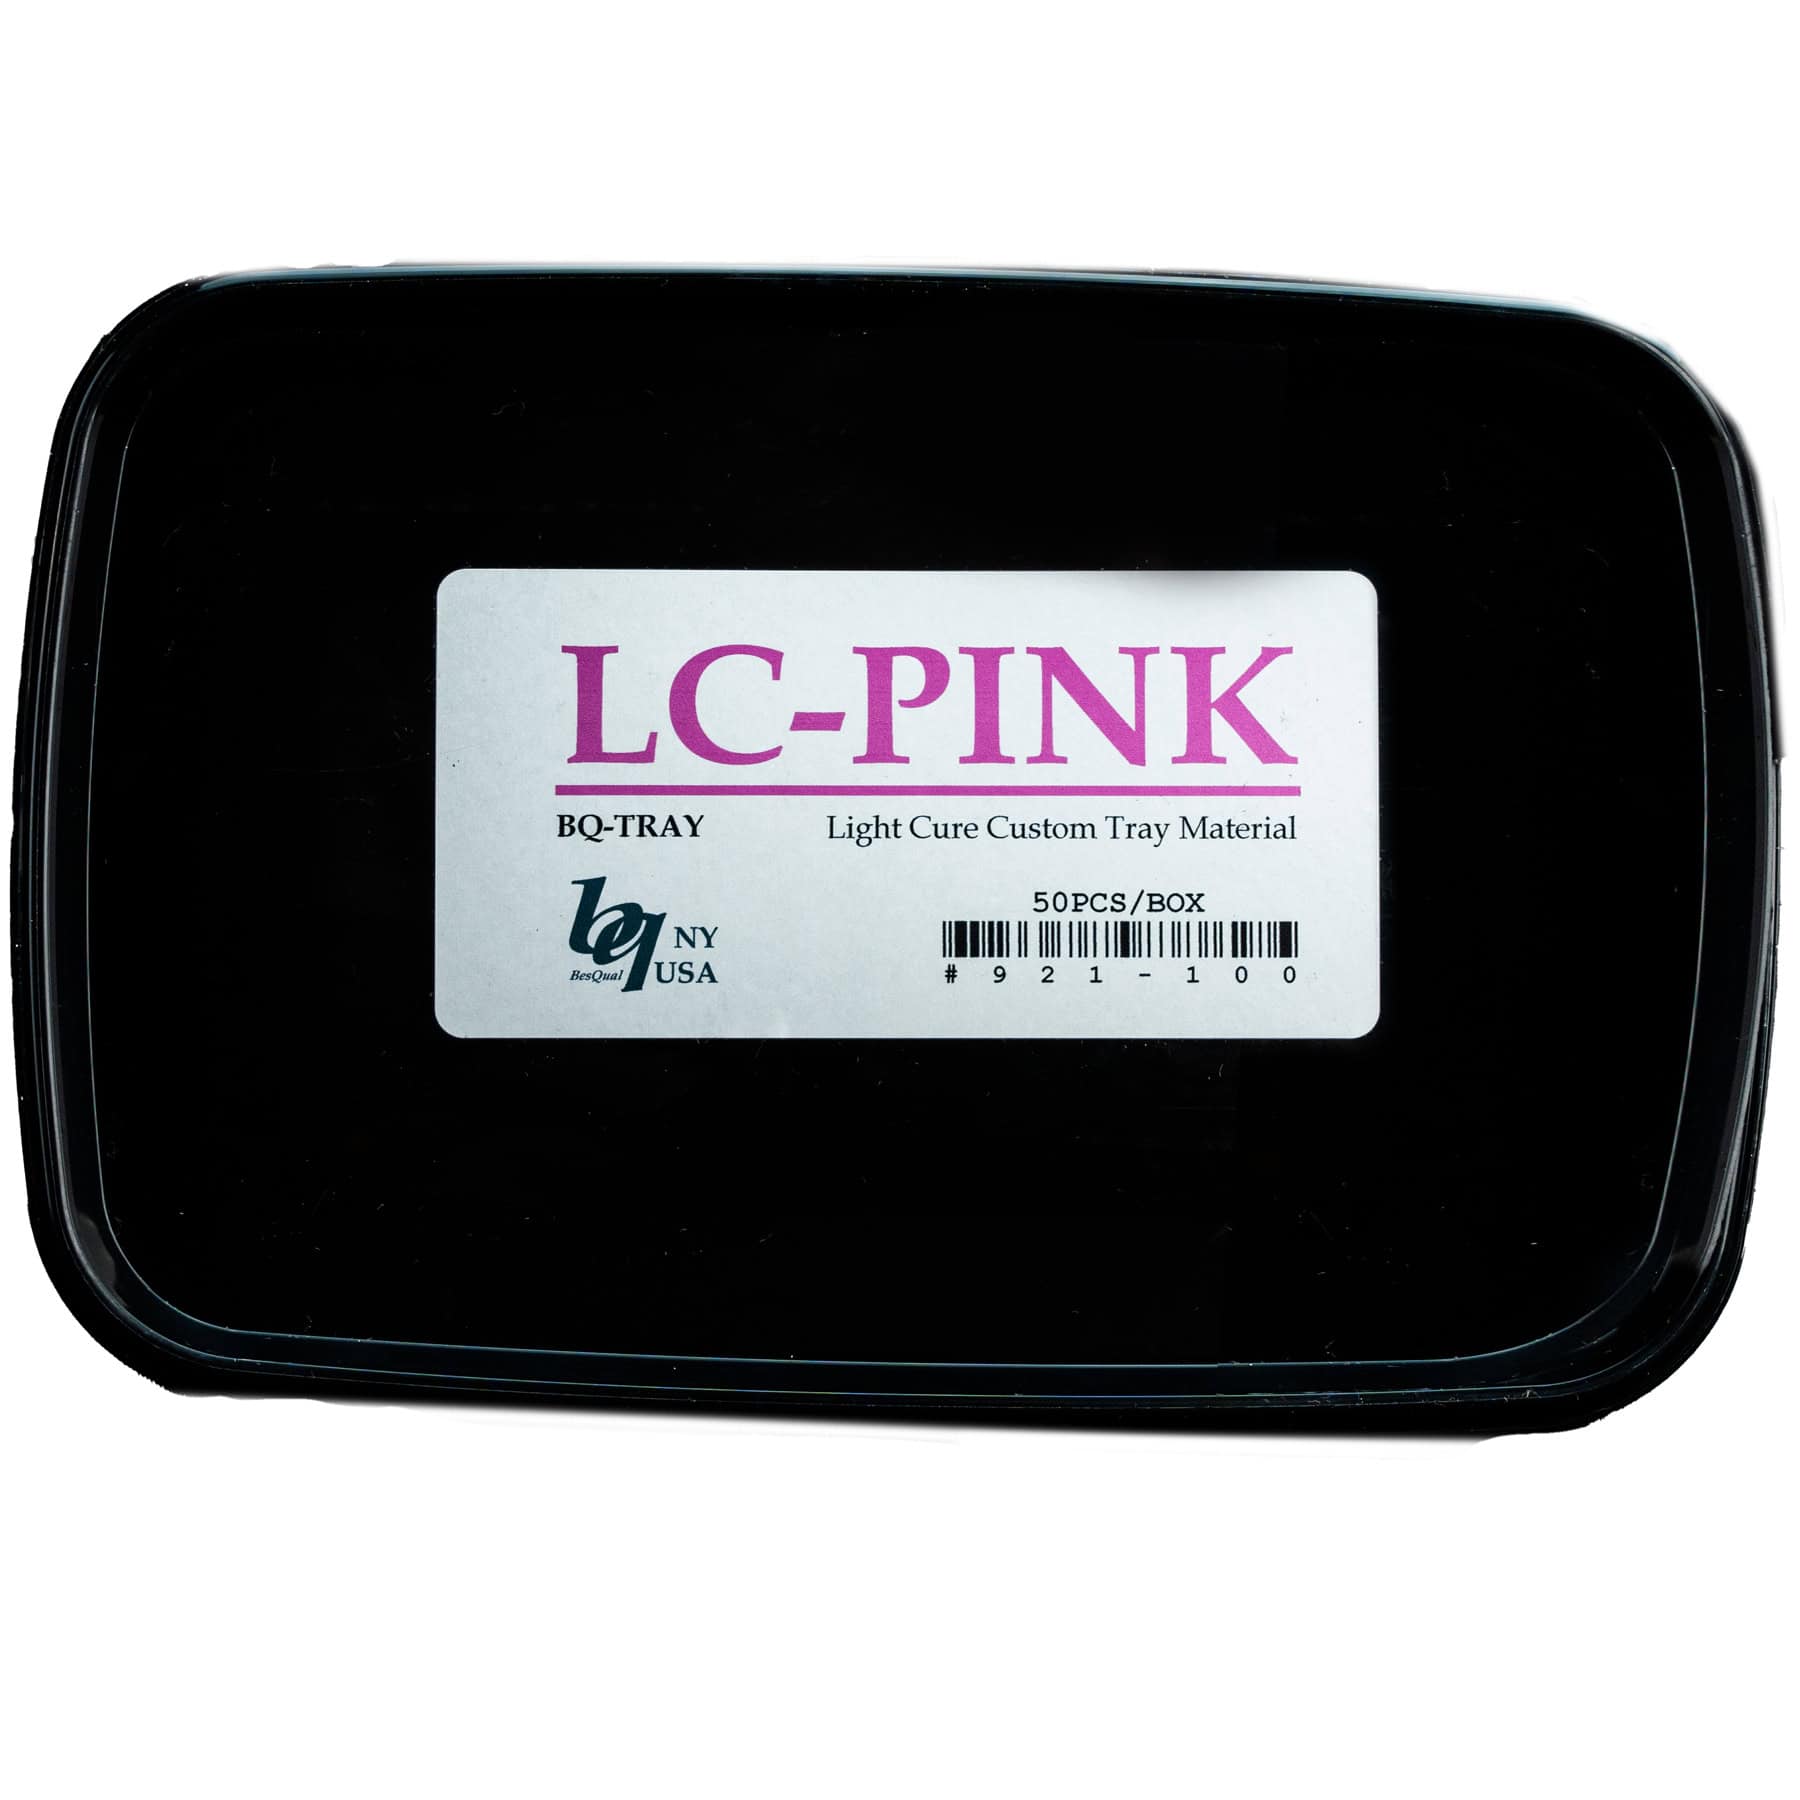 Light Cure Custom Tray Material, LC-PINK, 2.0 mm Thick, 50pcs/box.